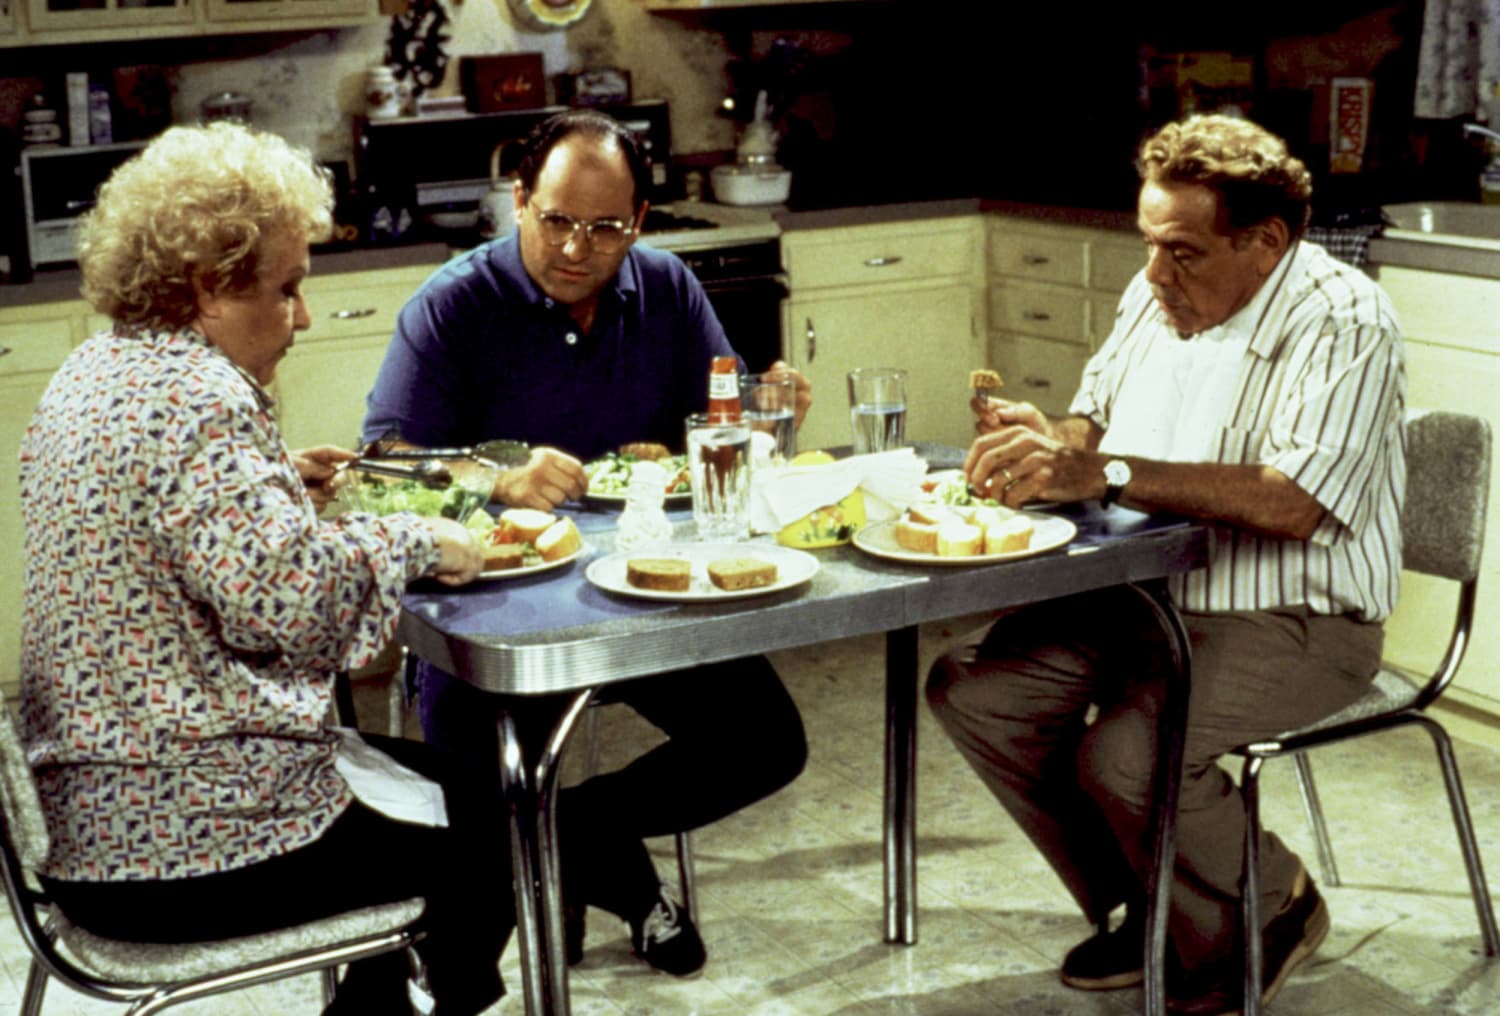 I Adored This Man”: The Seinfeld Cast Pays Touching Tribute to Jerry  Stiller